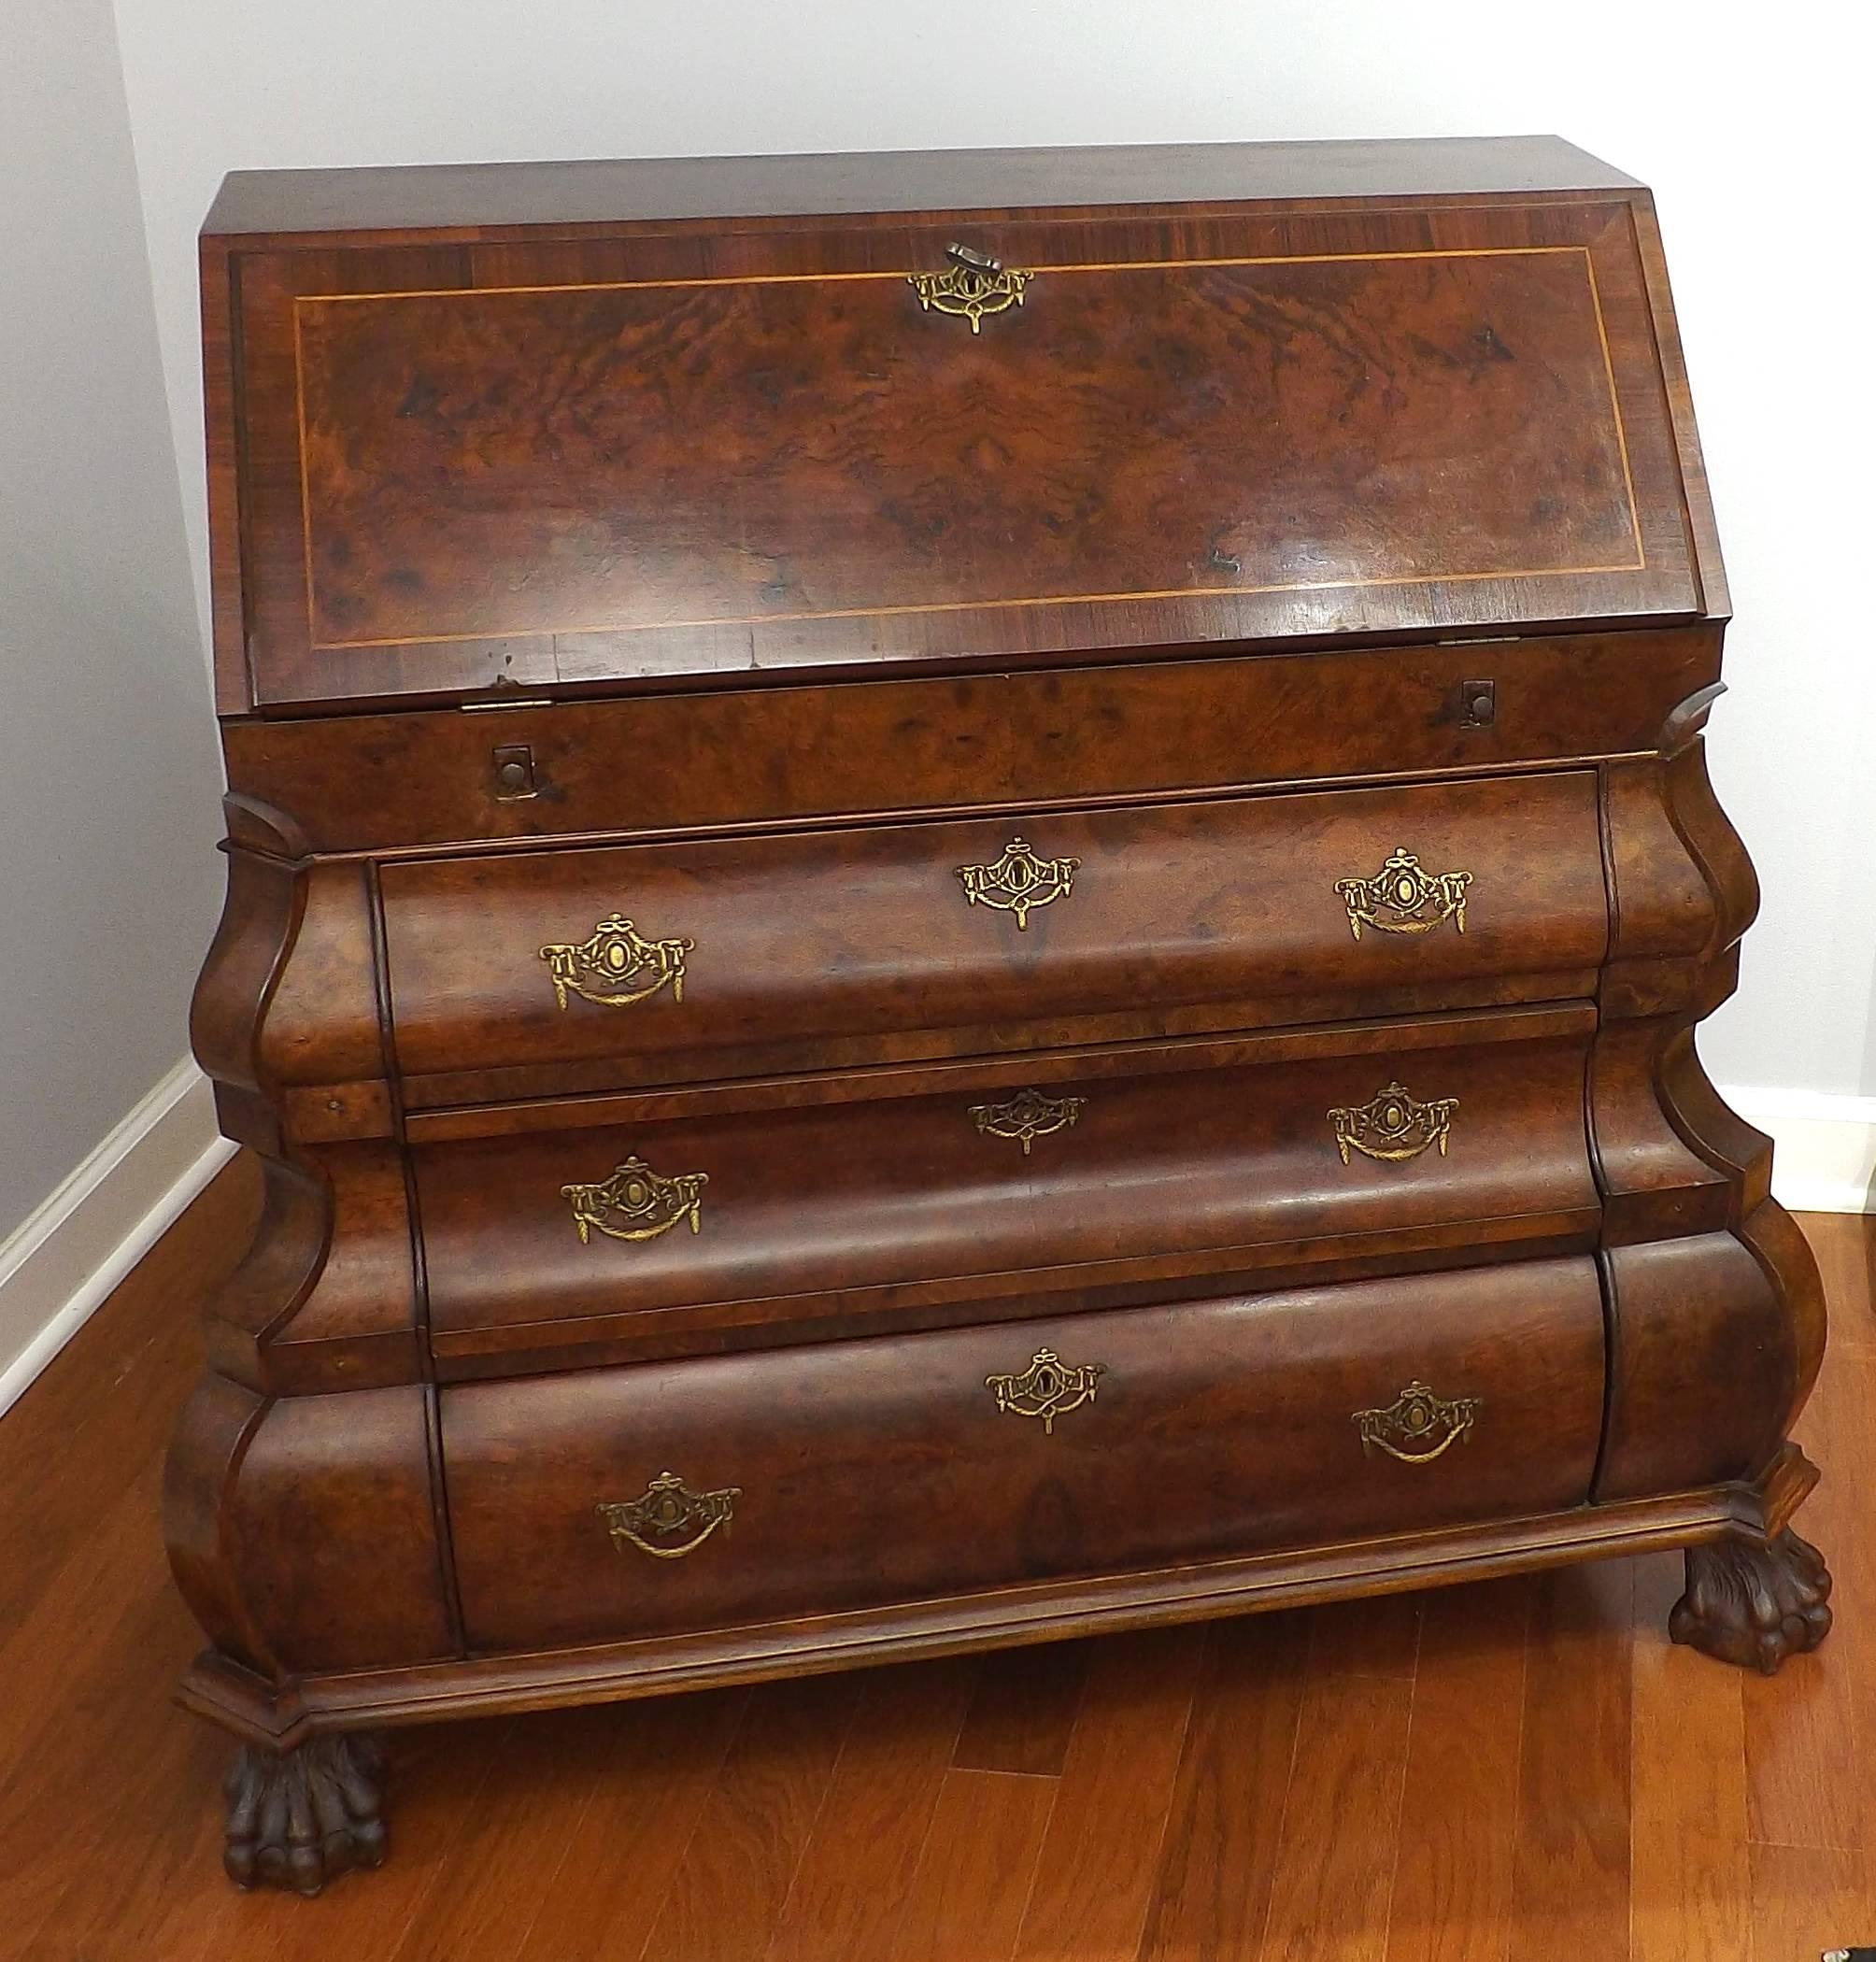 A magnificent Dutch bombe drop front desk with walnut burl and rosewood on claw and ball feet. Beautiful marquetry work and with two 'secret' compartments disguised as books. Two pull-out arms support the fold down writing surface, which can be